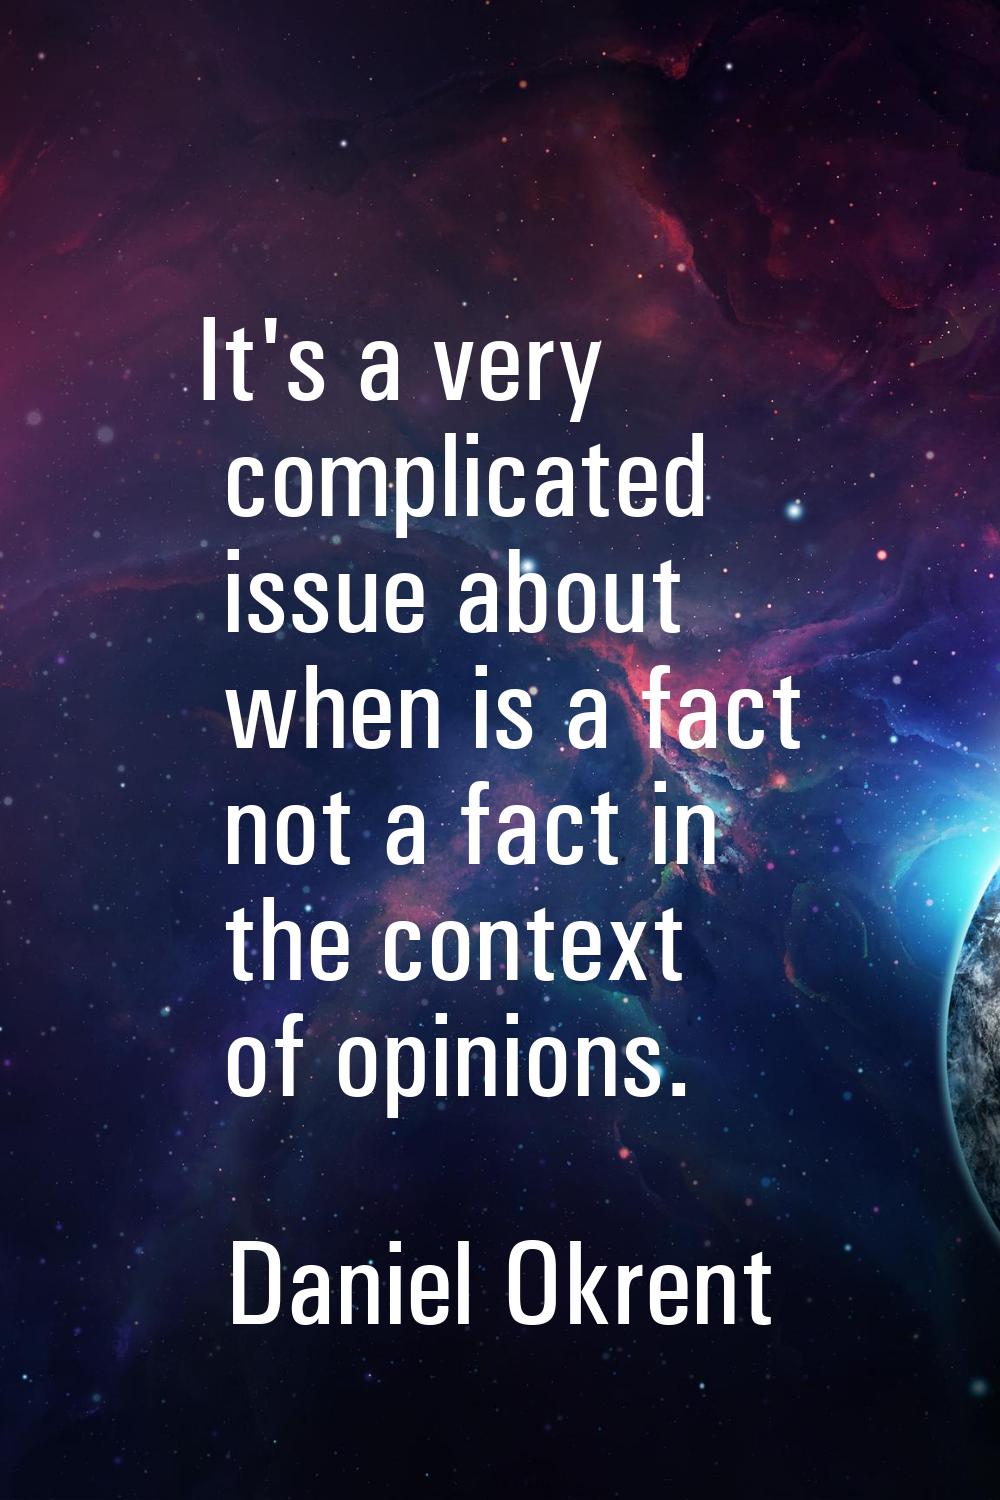 It's a very complicated issue about when is a fact not a fact in the context of opinions.